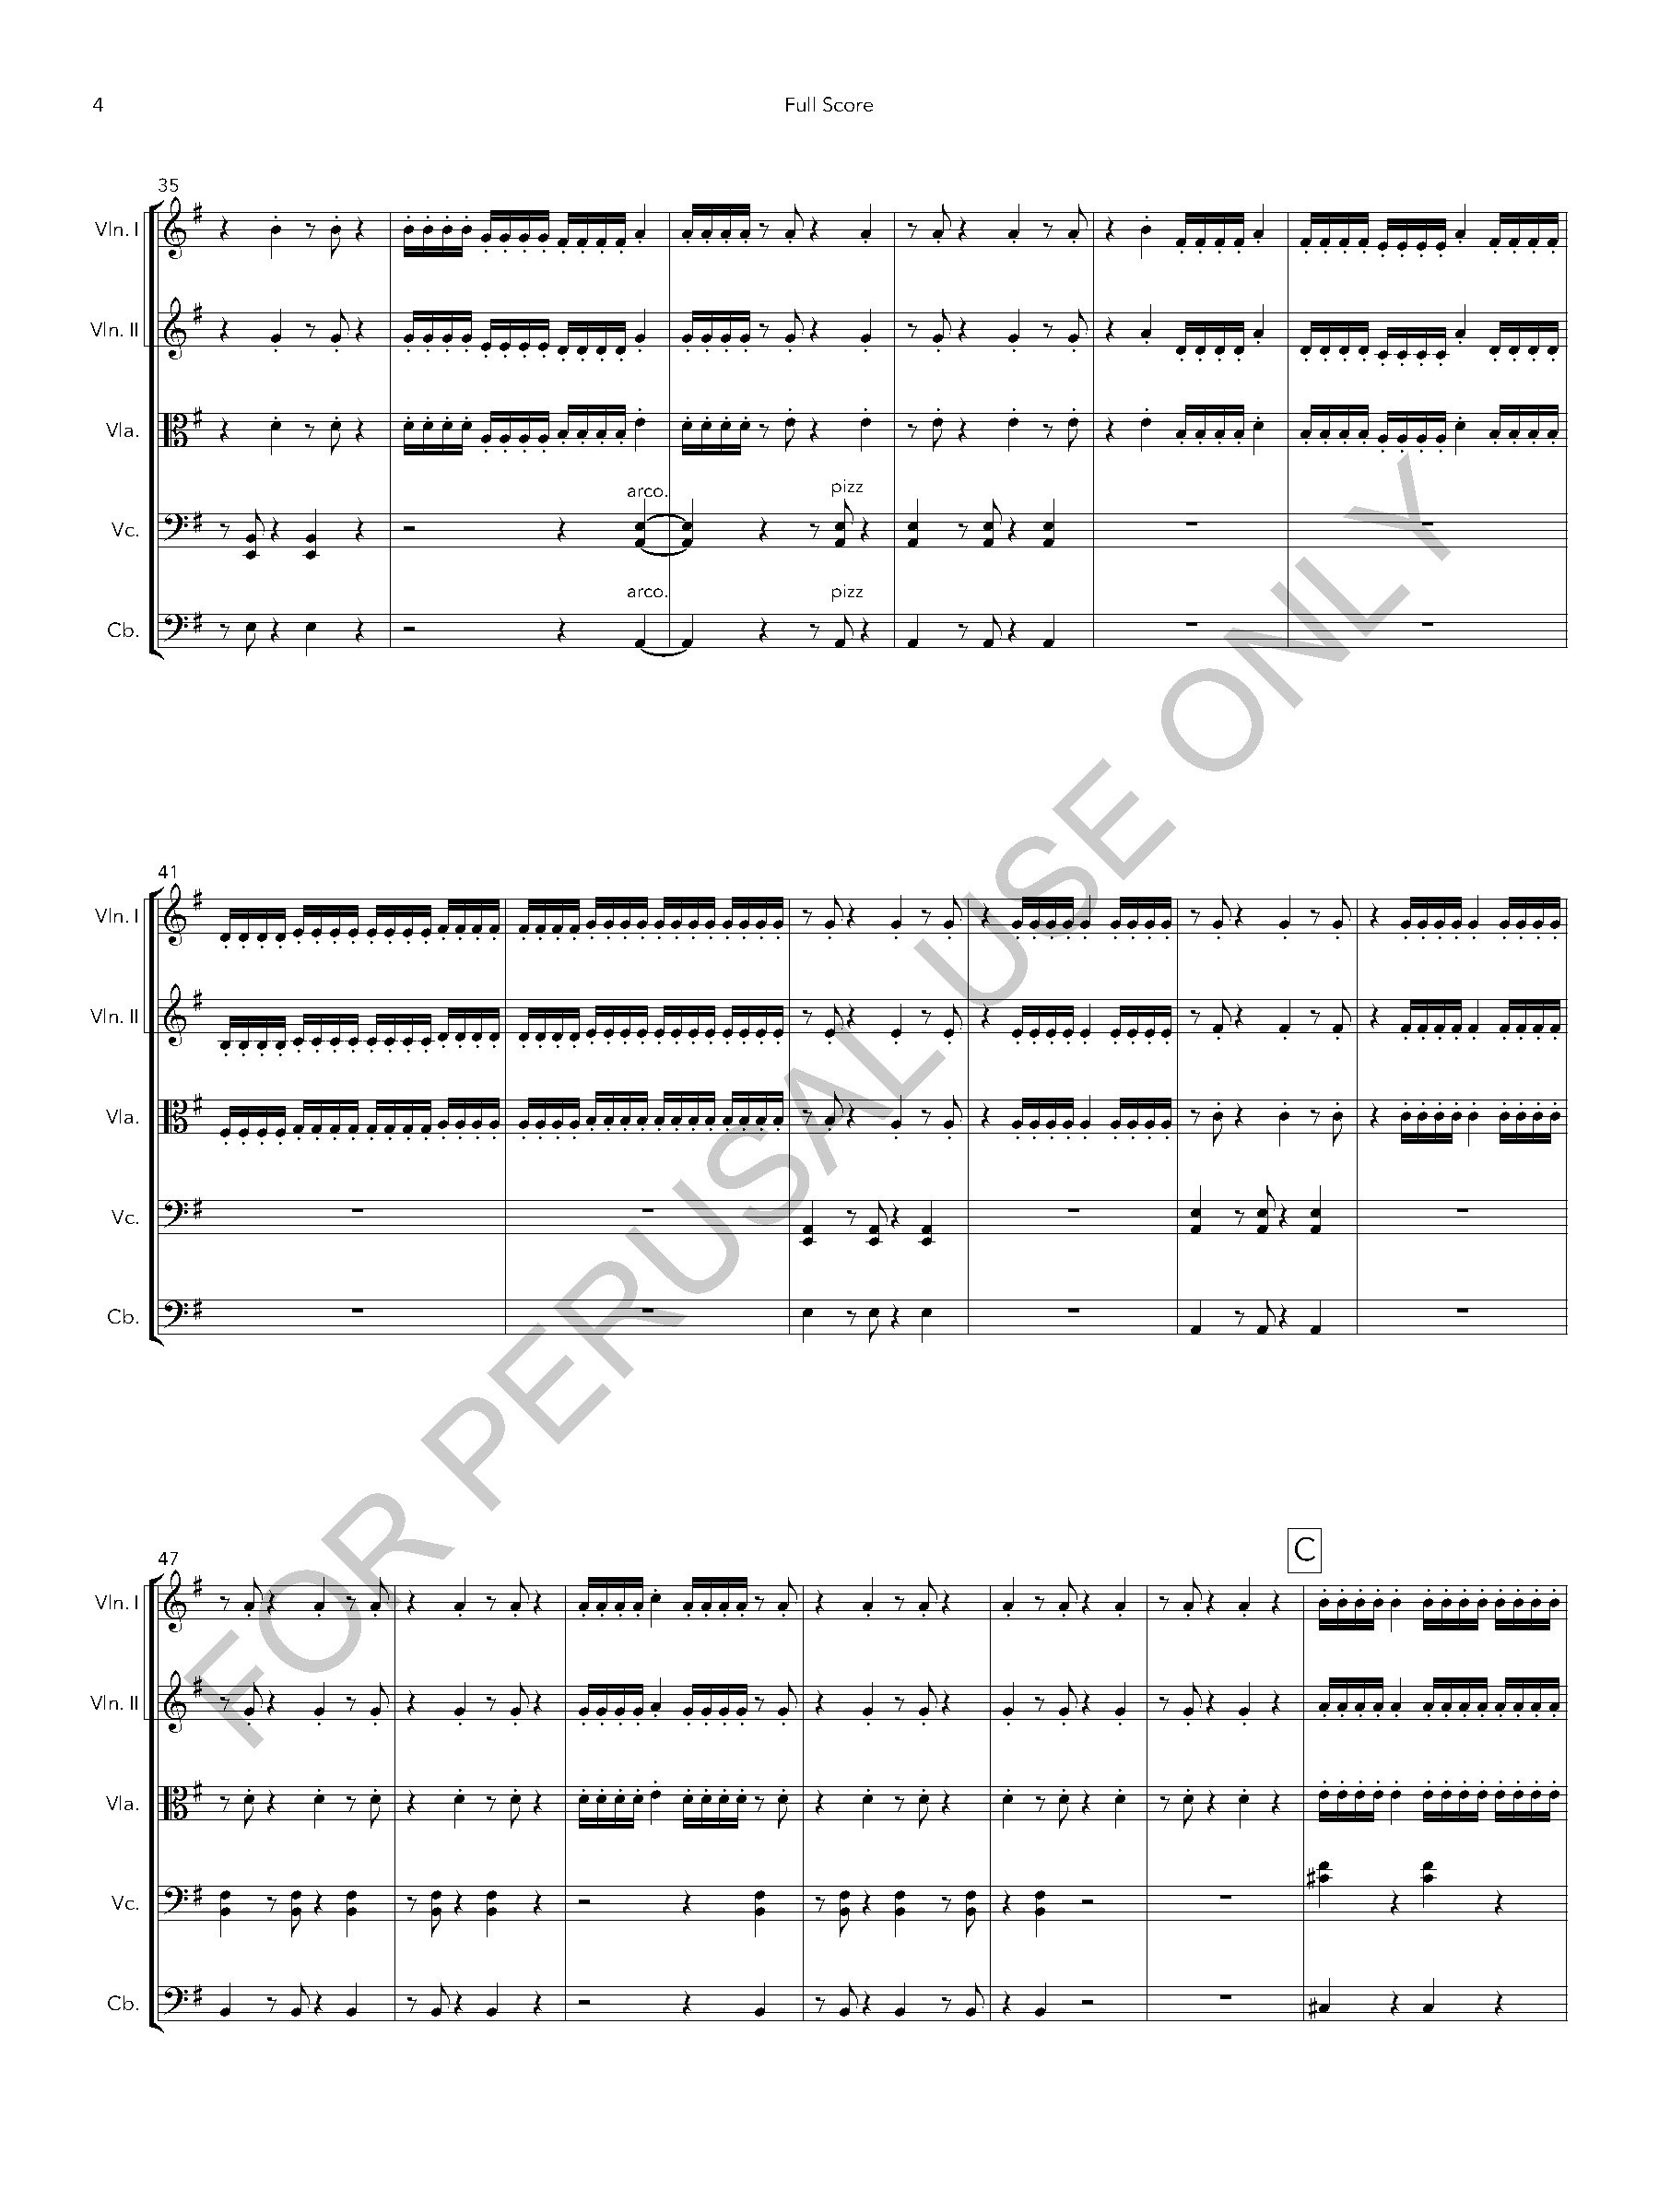 Face of Another - arr. for string orchestra - Full Score_Page_04.jpg